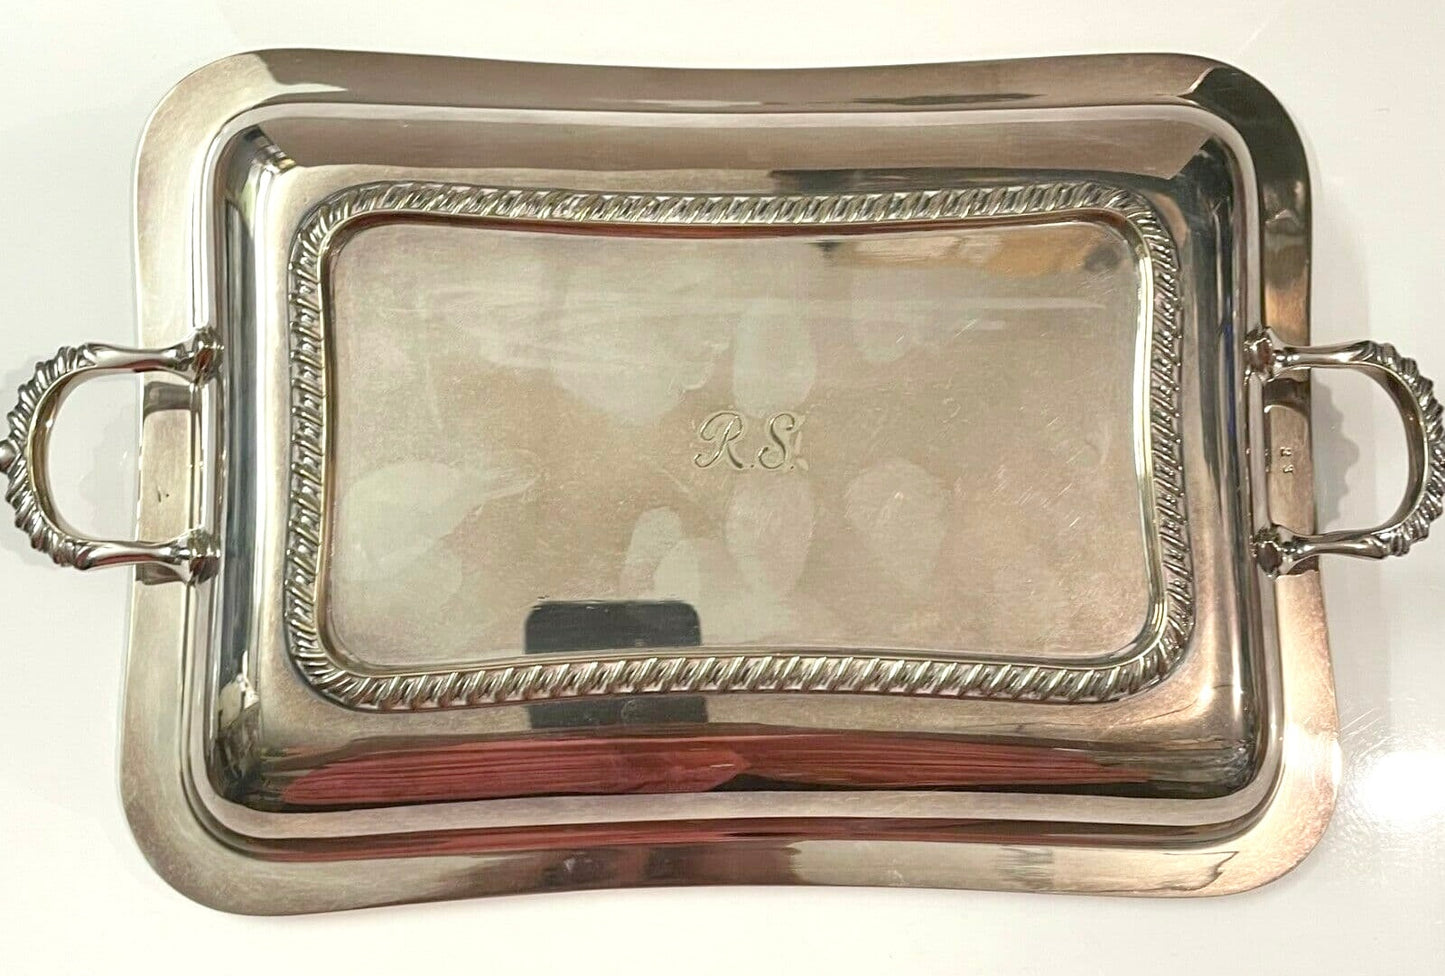 Silver plated serving tray with handles - Pre Loved